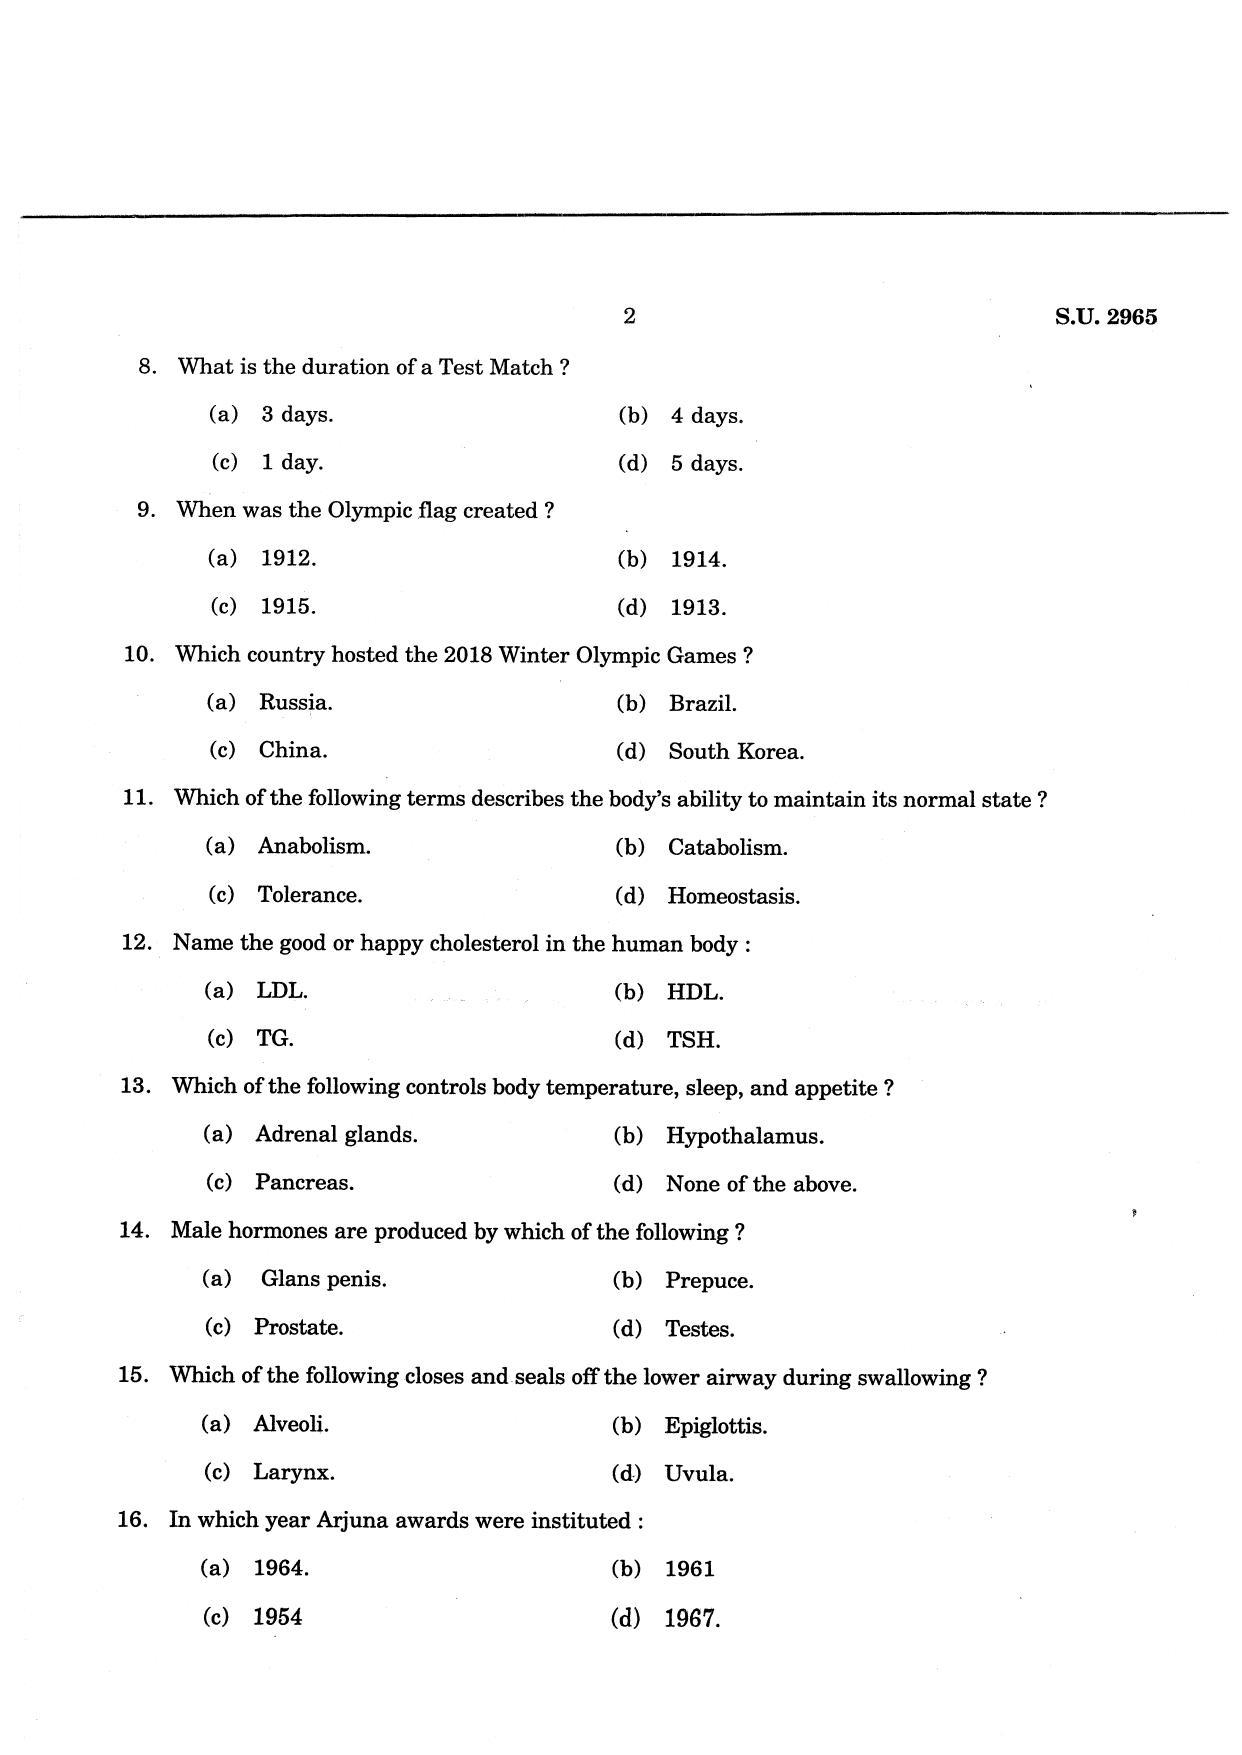 SSUS Entrance Exam MPES 2021 Question Paper - Page 2